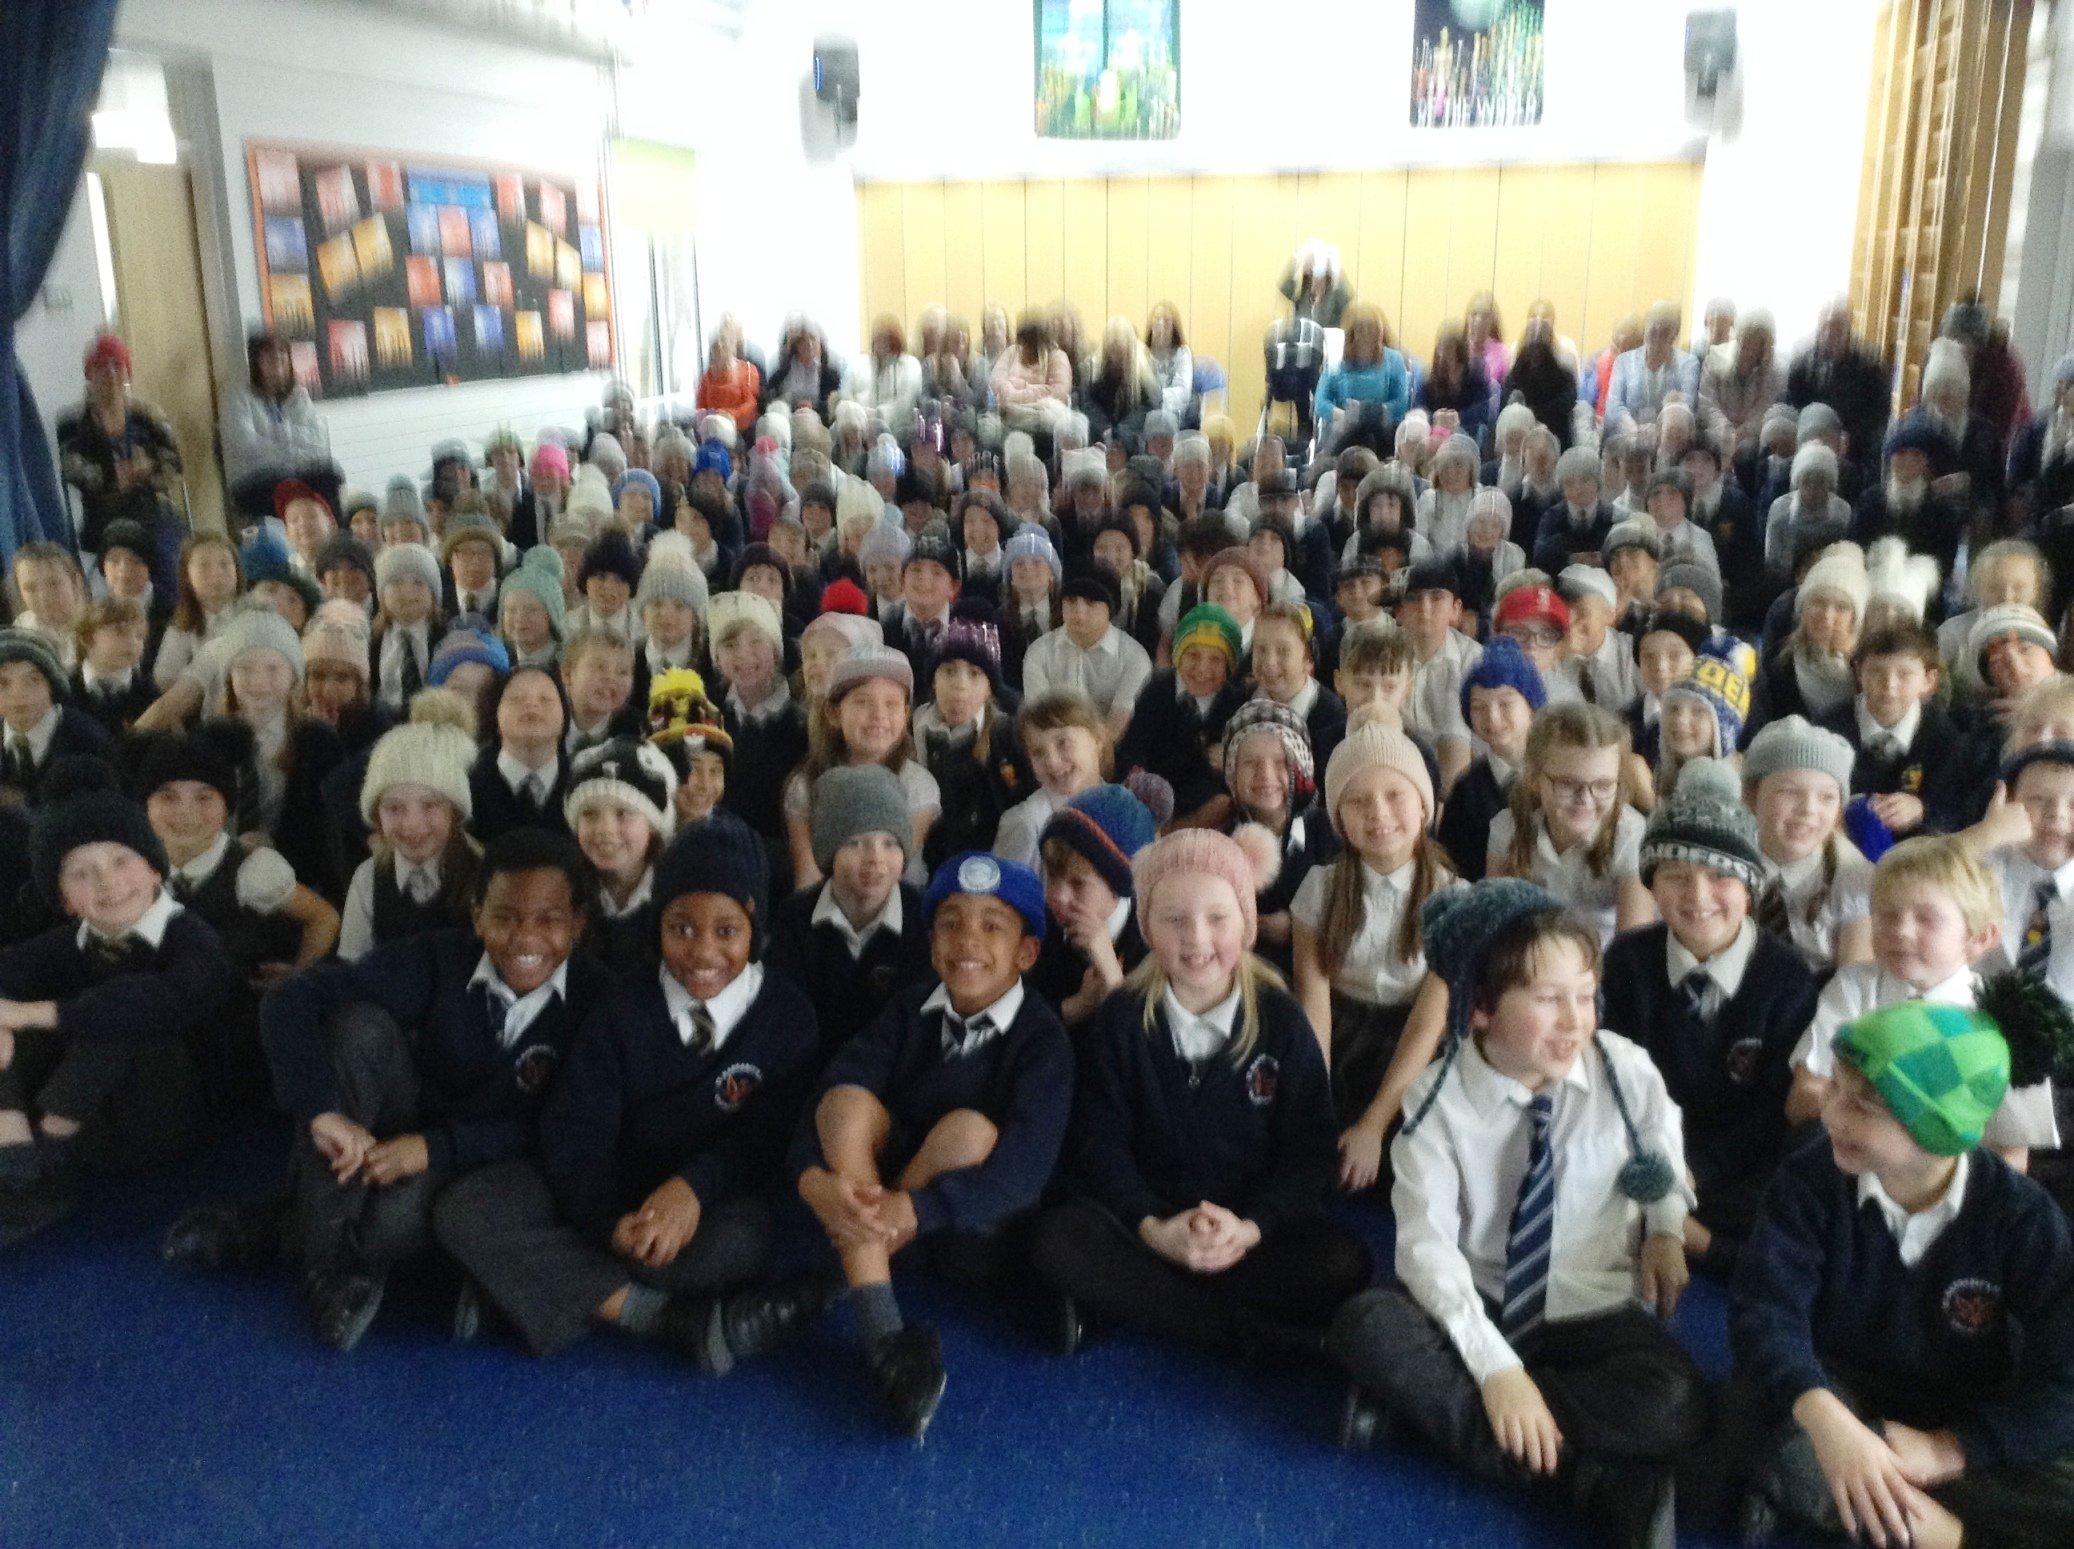 Woolly Hat Day at St Margaret's Primary School in Angmering